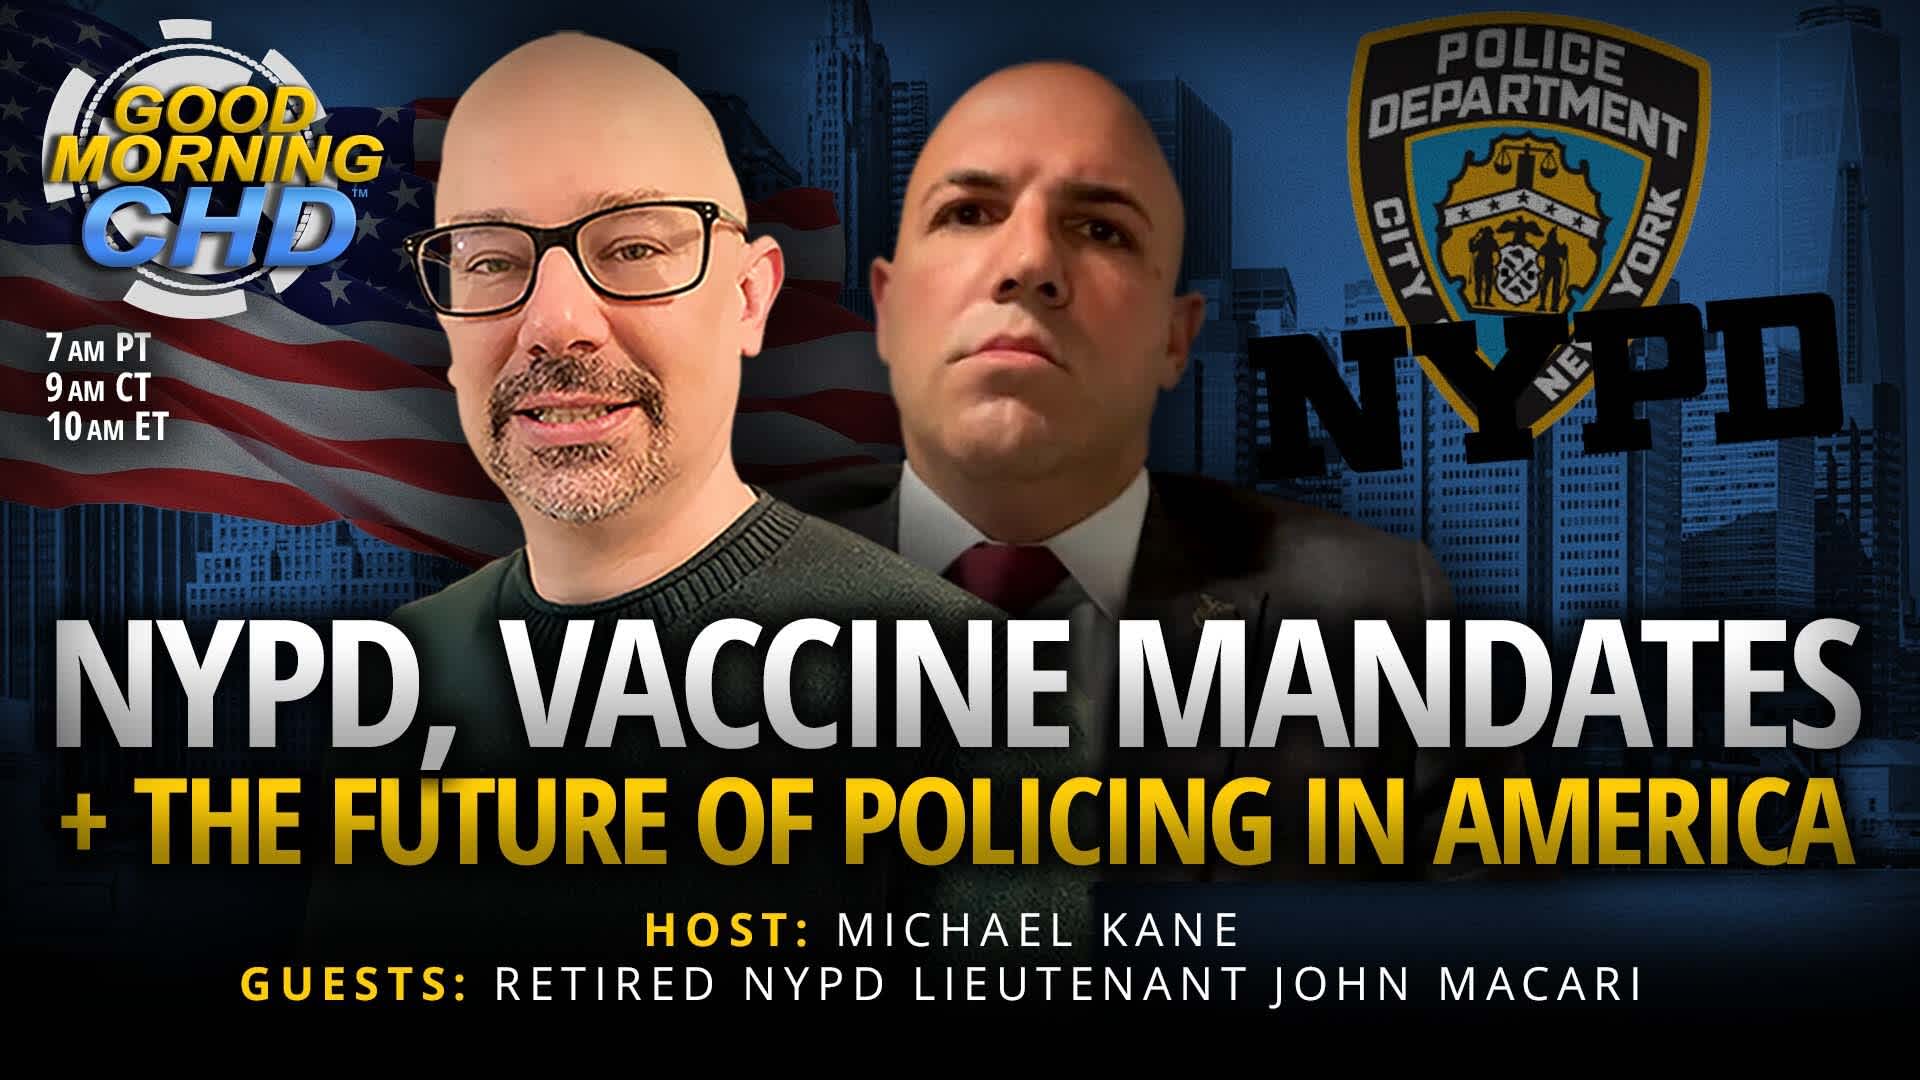 NYPD, Vaccine Mandates + The Future of Policing in America